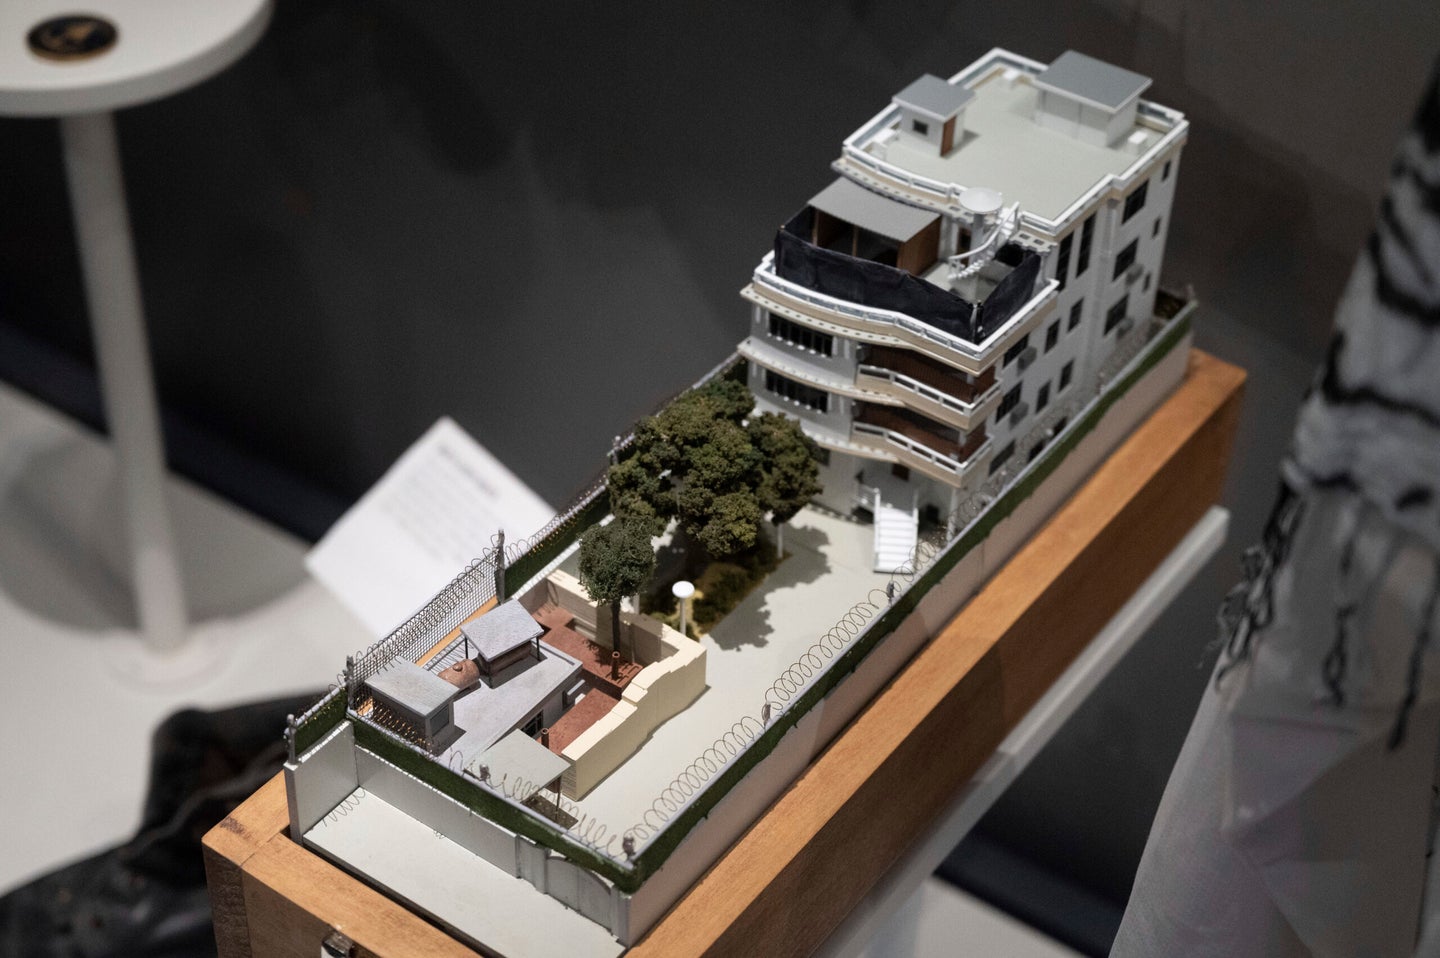 A model of the house where a precision counterterrorism operation killed al-Qaida's leader Ayman al-Zawahri is displayed in the refurbished museum at the Central Intelligence Agency headquarters building in Langley, Va., Saturday, Sept. 24, 2022. (AP Photo/Kevin Wolf)